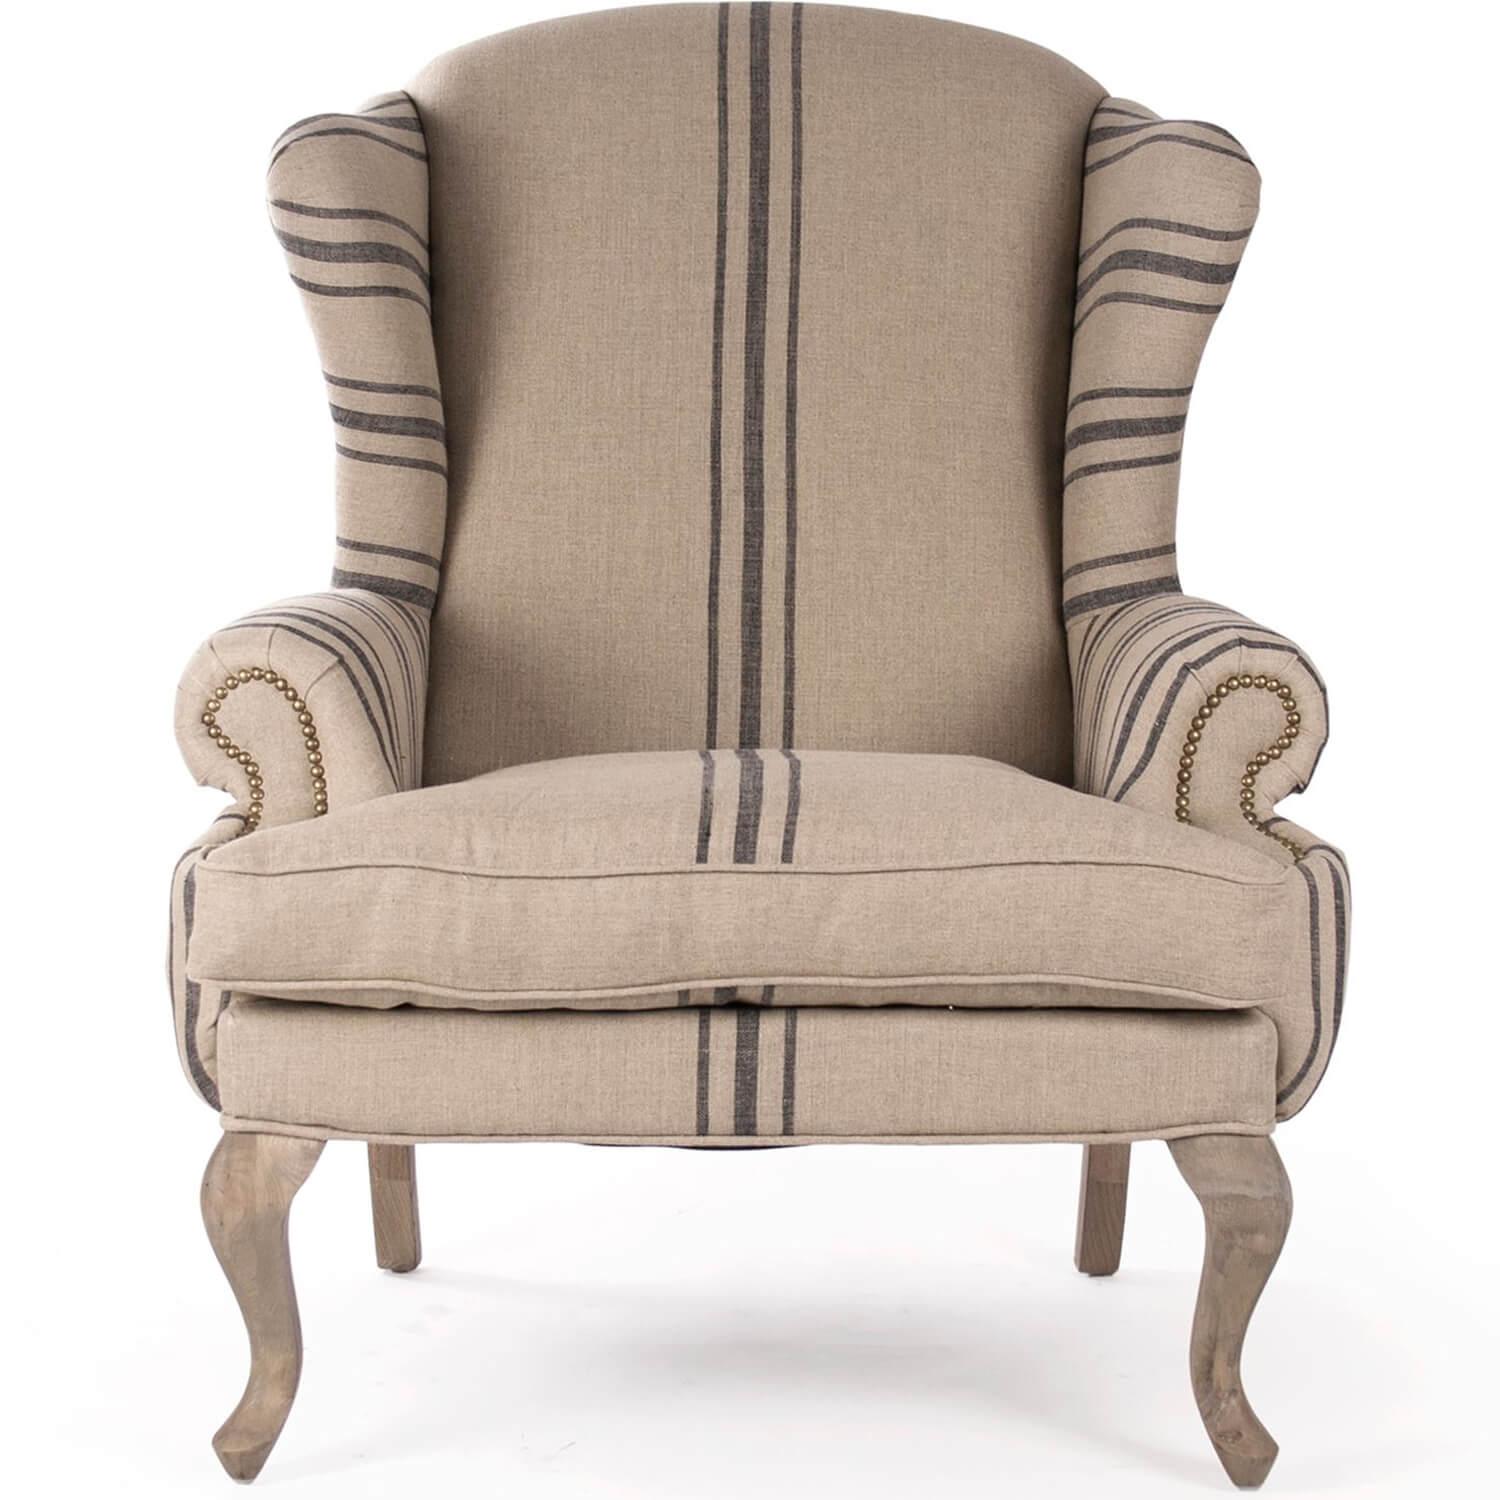 French Blue Striped Arm Chair - Belle Escape